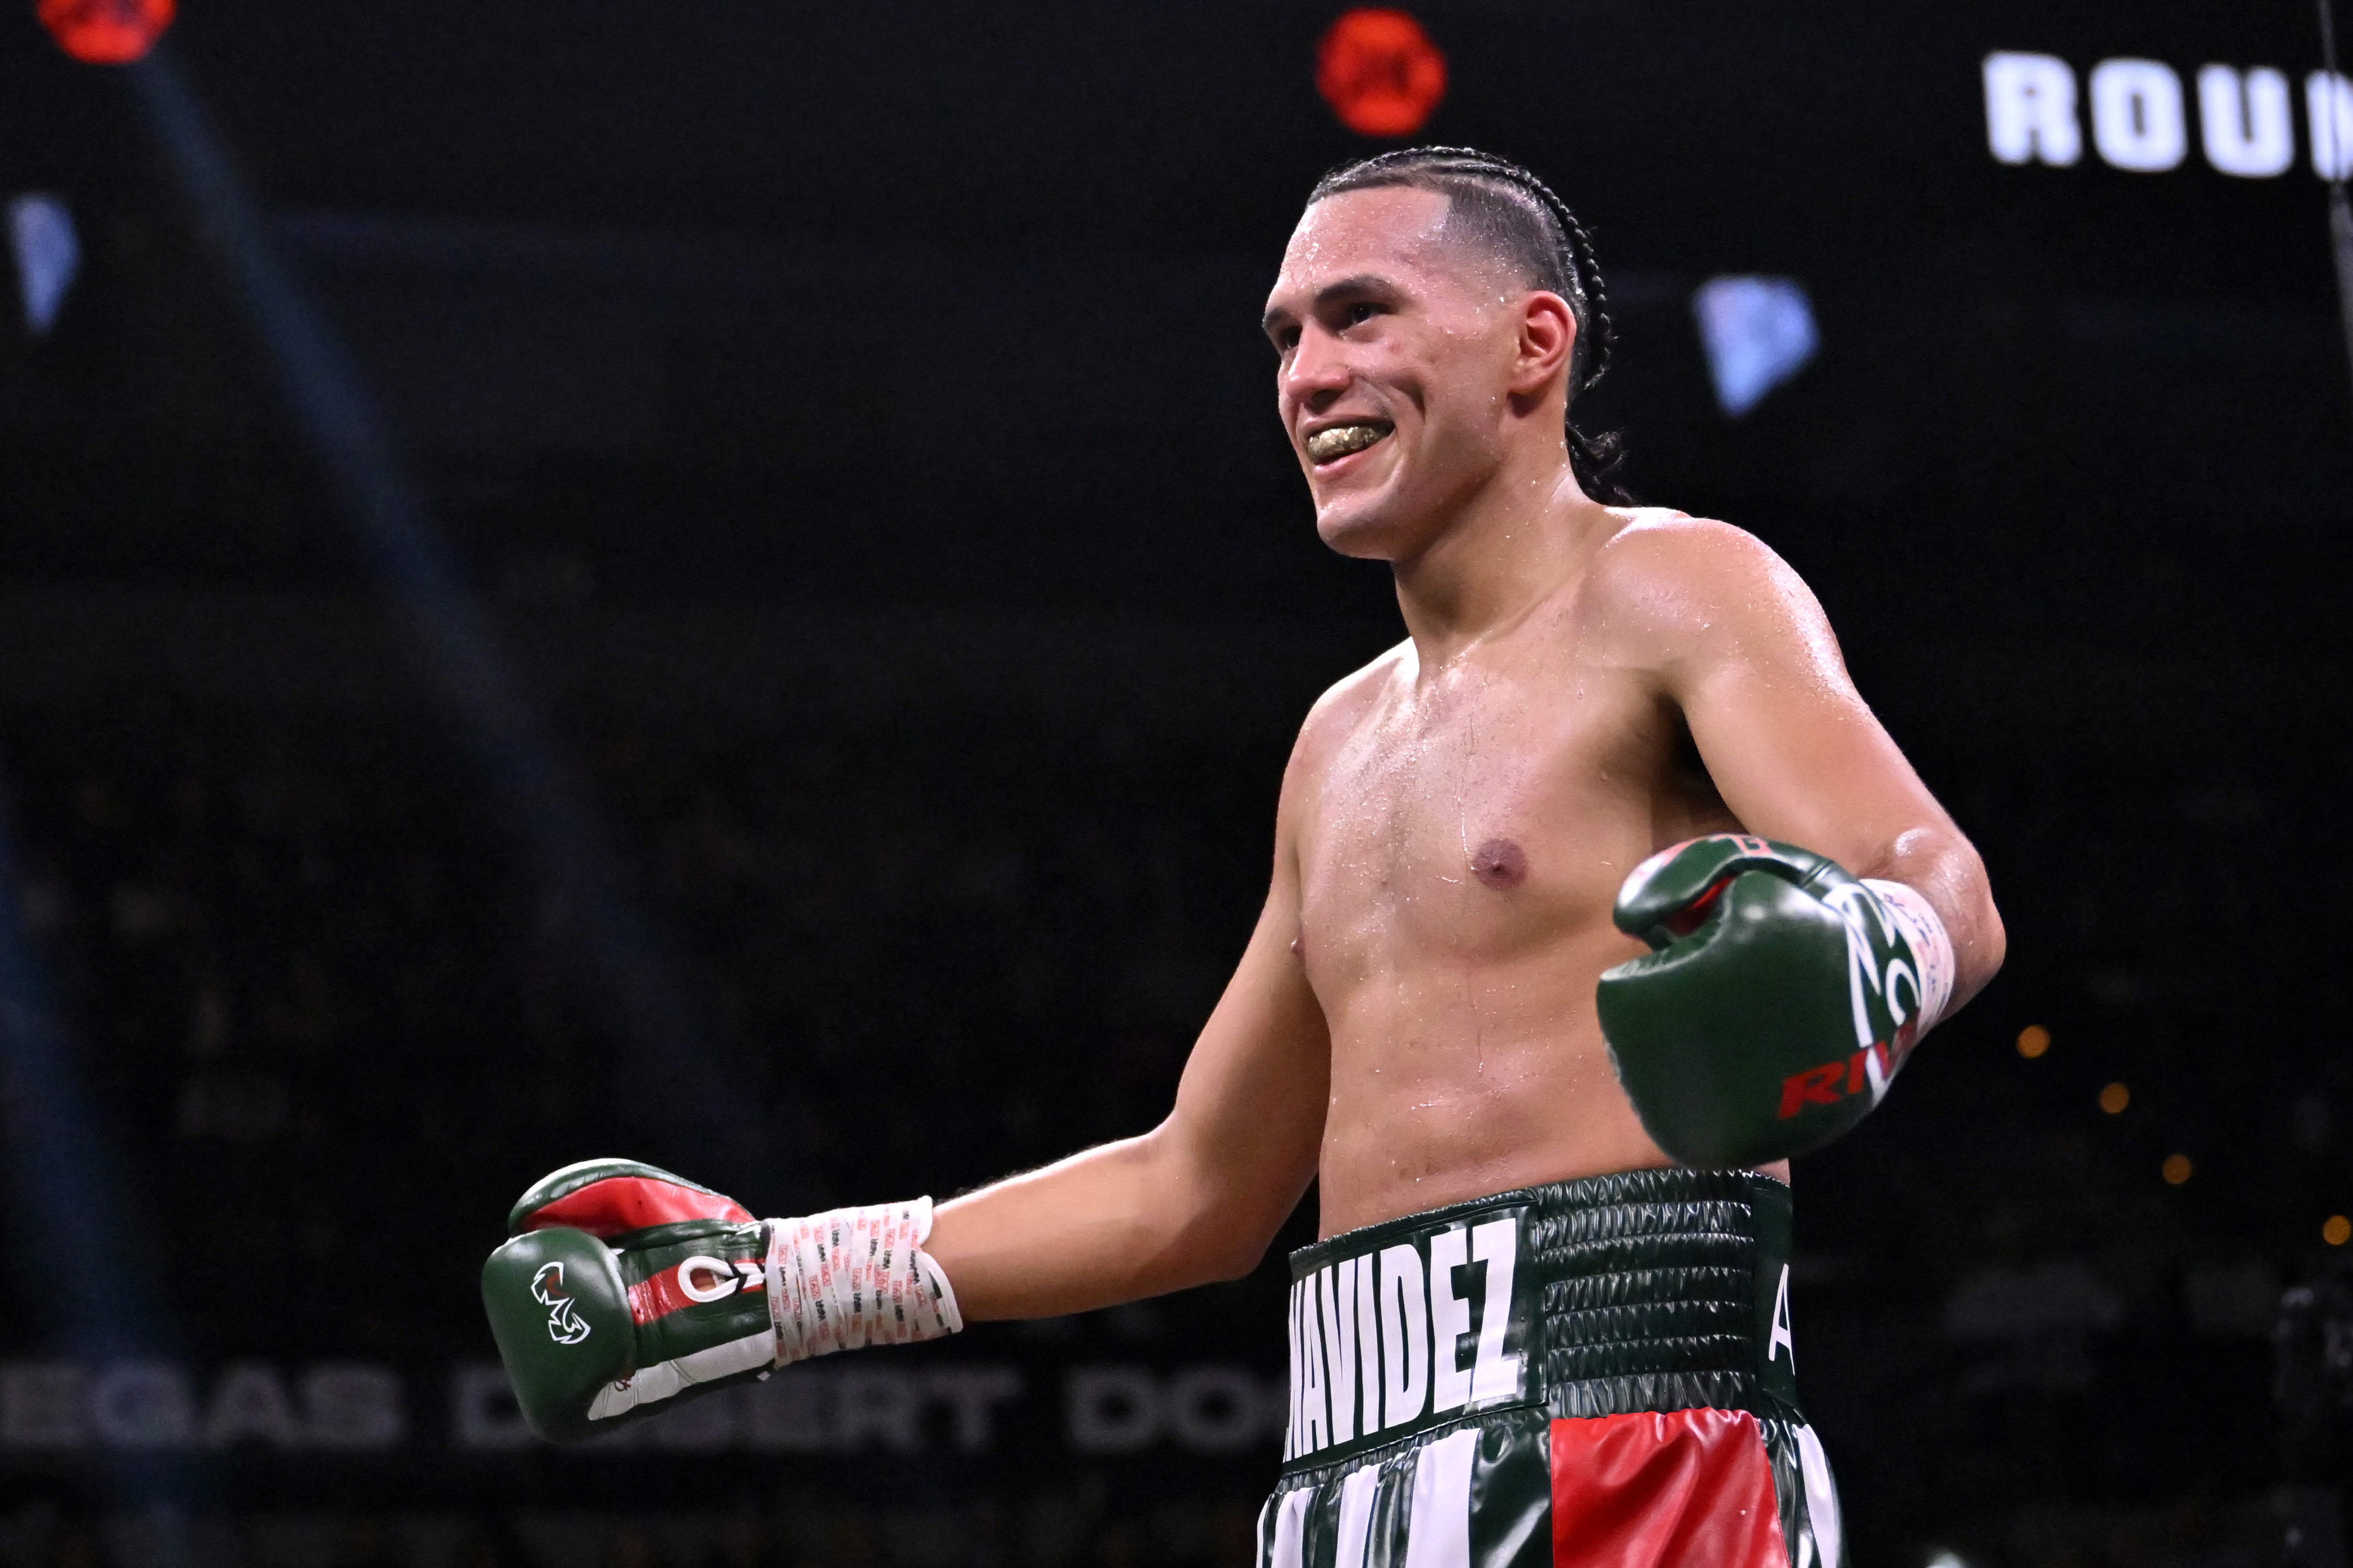 David Benavidez looks to capture a title at light heavyweight after failing to secure a fight against Canelo Alvarez.